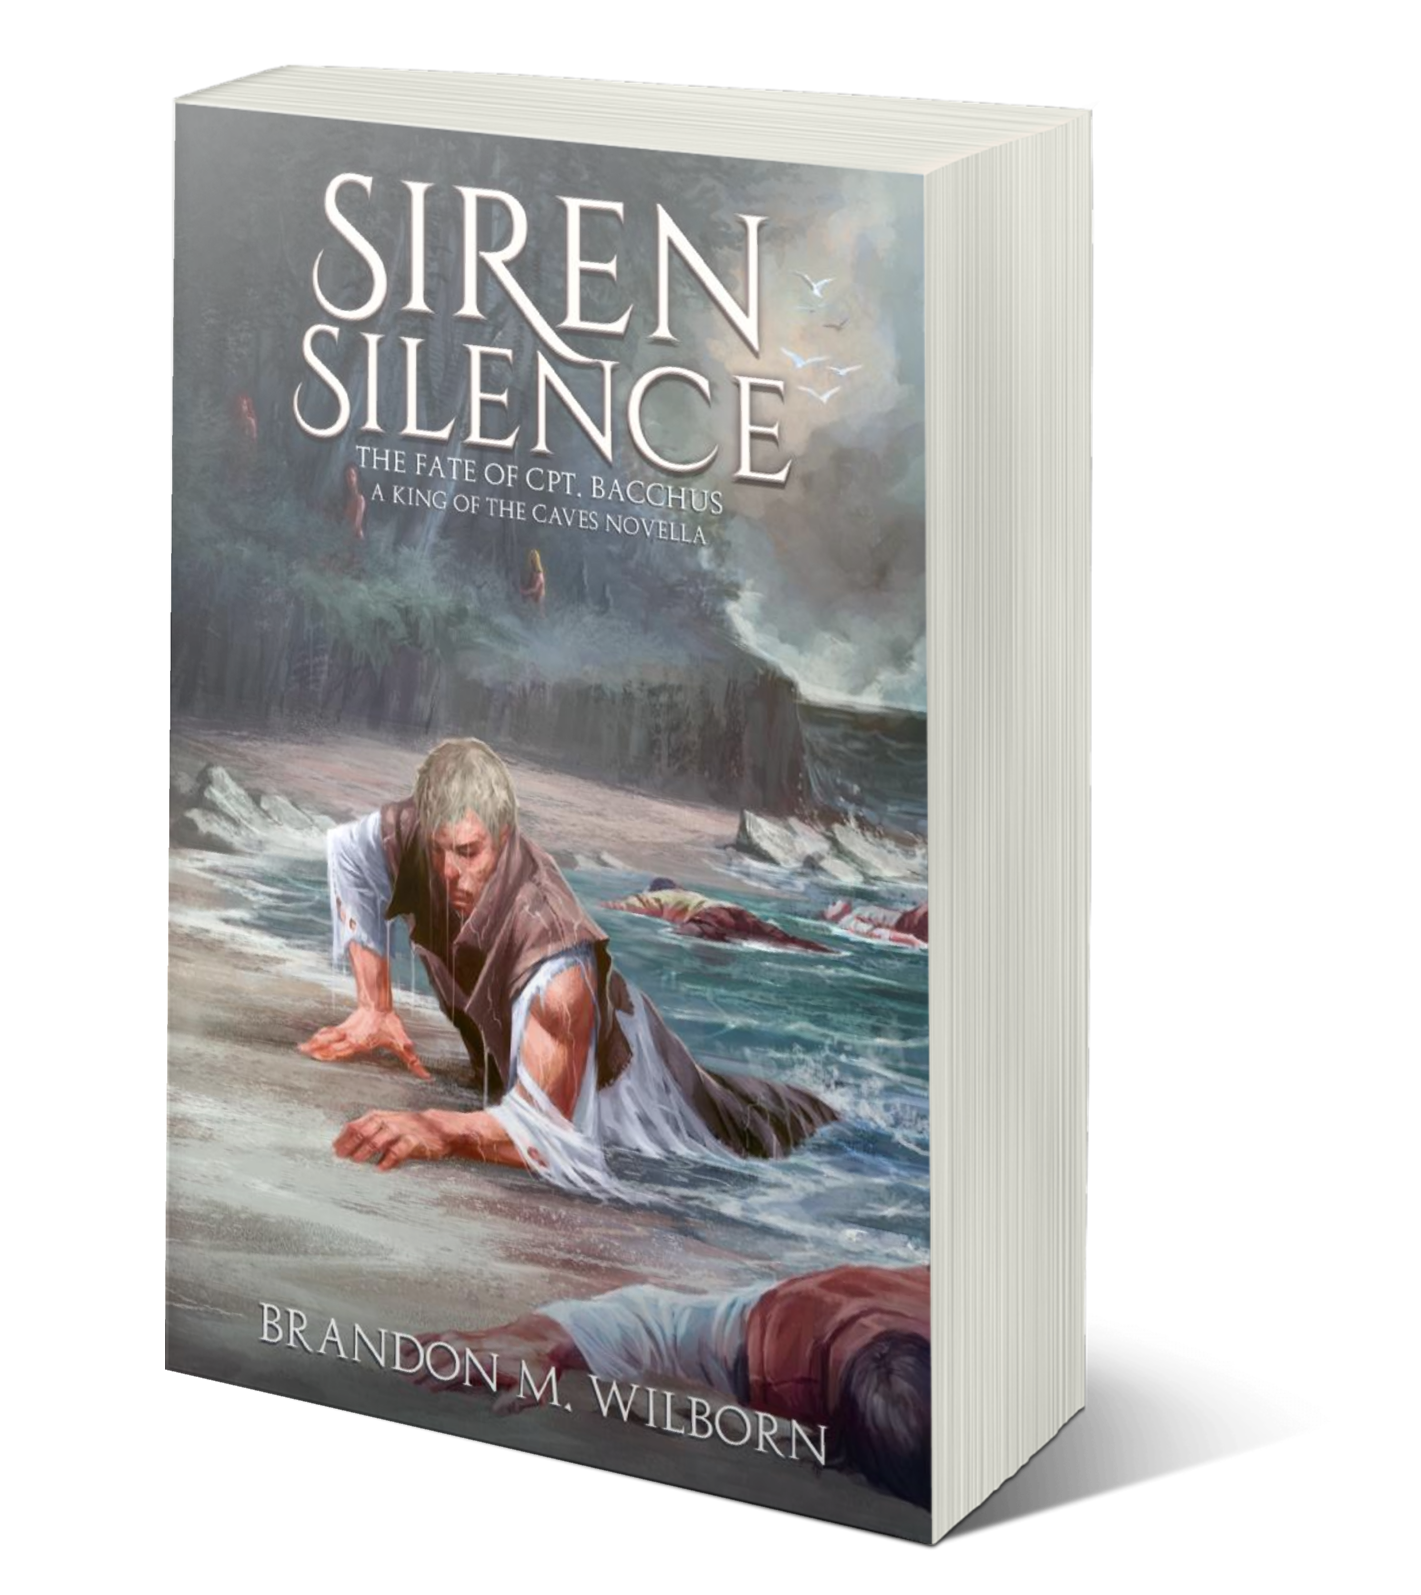 Siren Silence: The Fate of Cpt. Bacchus